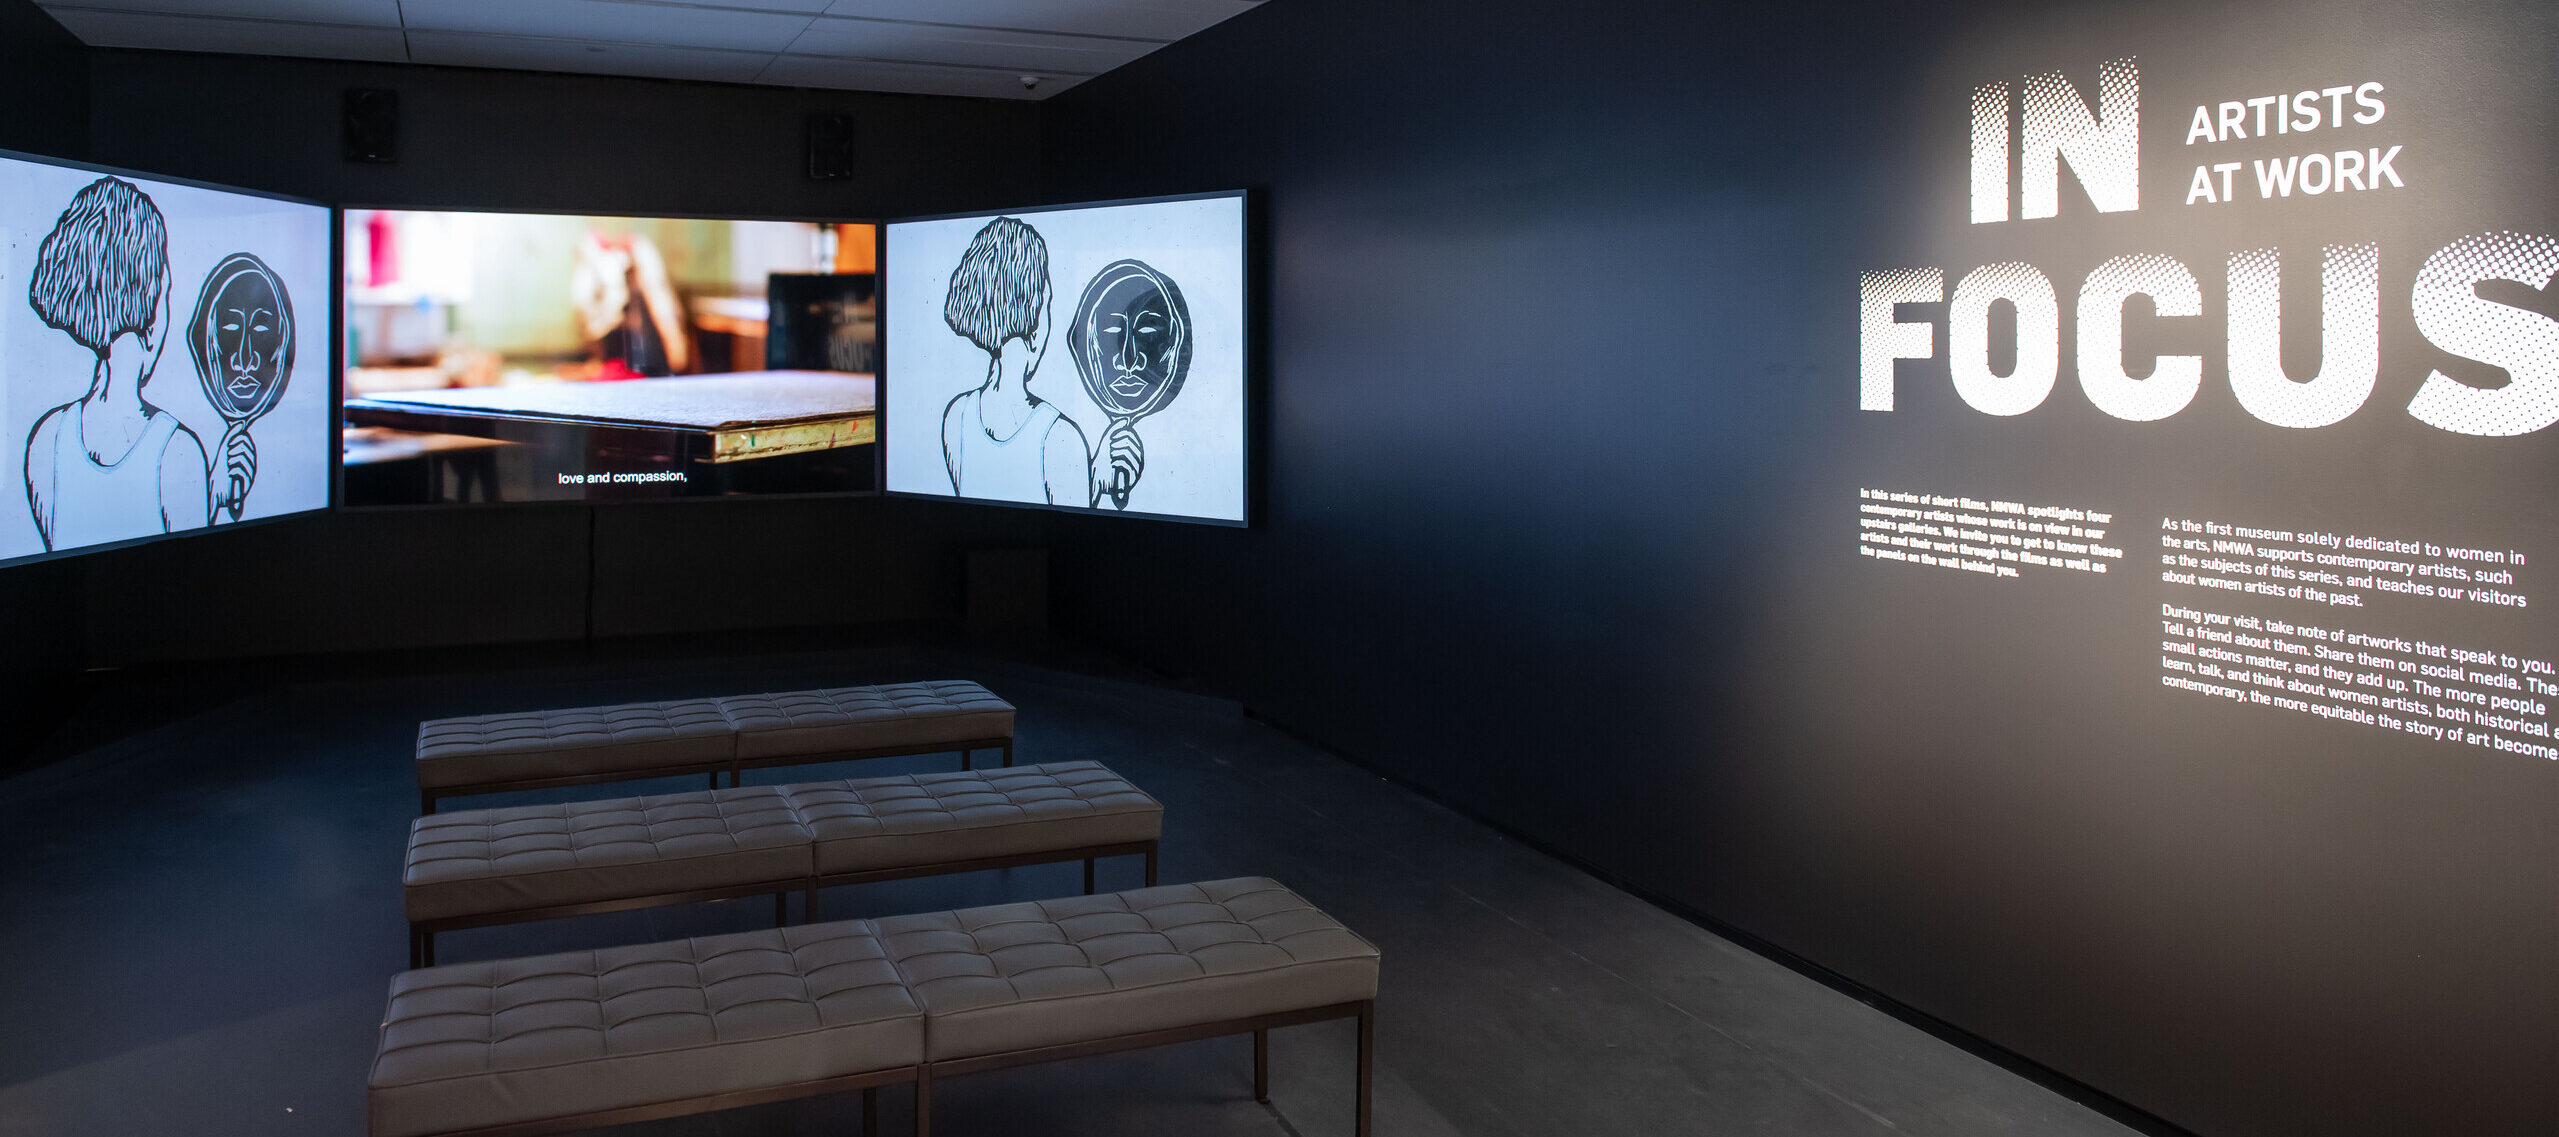 A dark gallery space with three large screens playing a video. Three tufted benches are in front of the screens. On the right wall, it says 